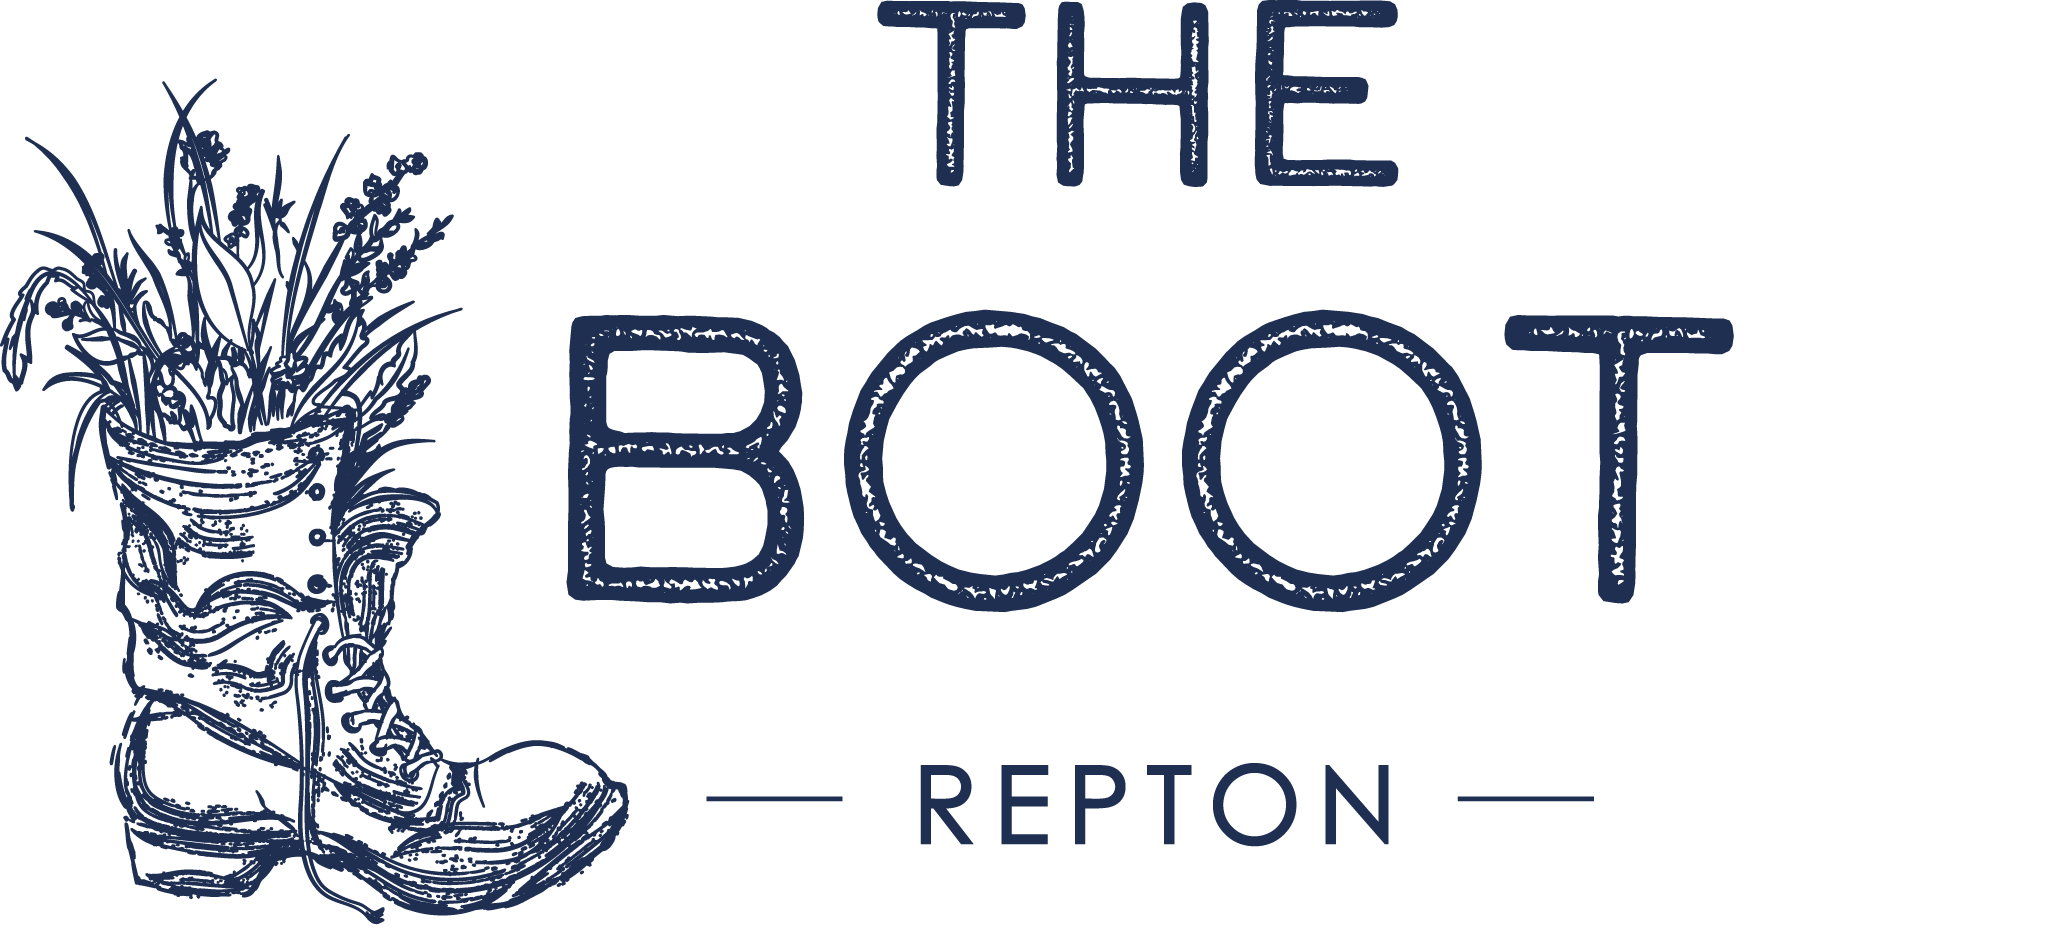 The Boot at Repton